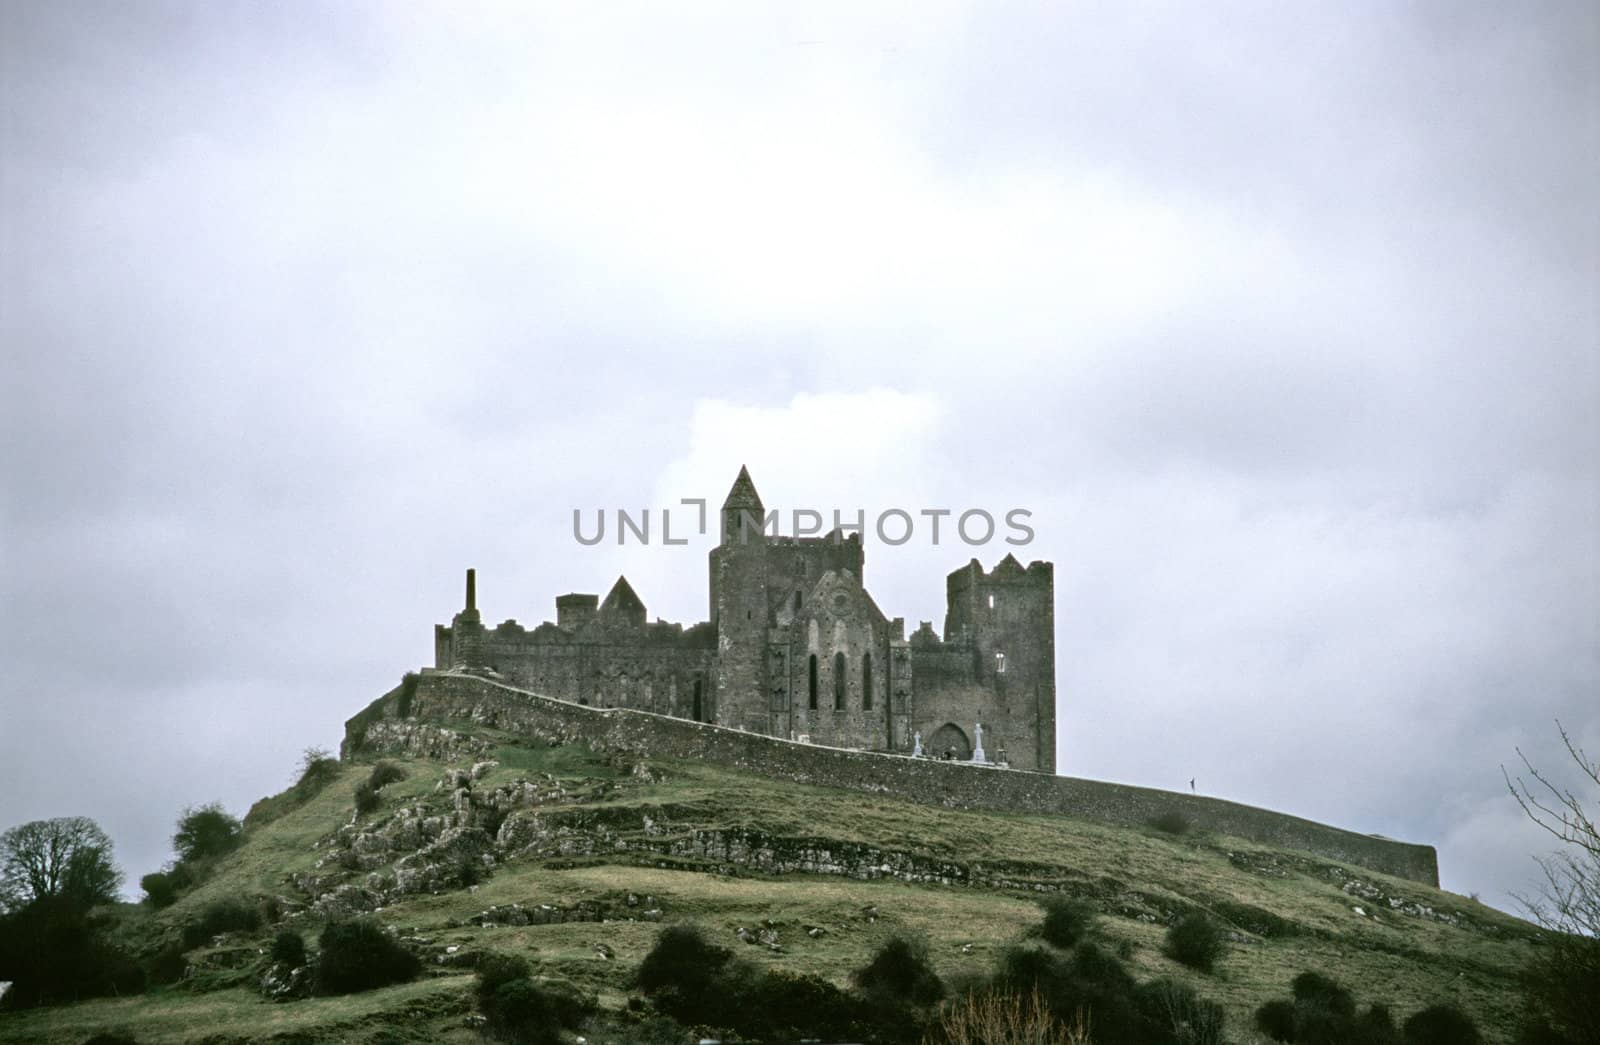 The famous ruins of the Rock of Cashel, Co. Tipperary, Ireland